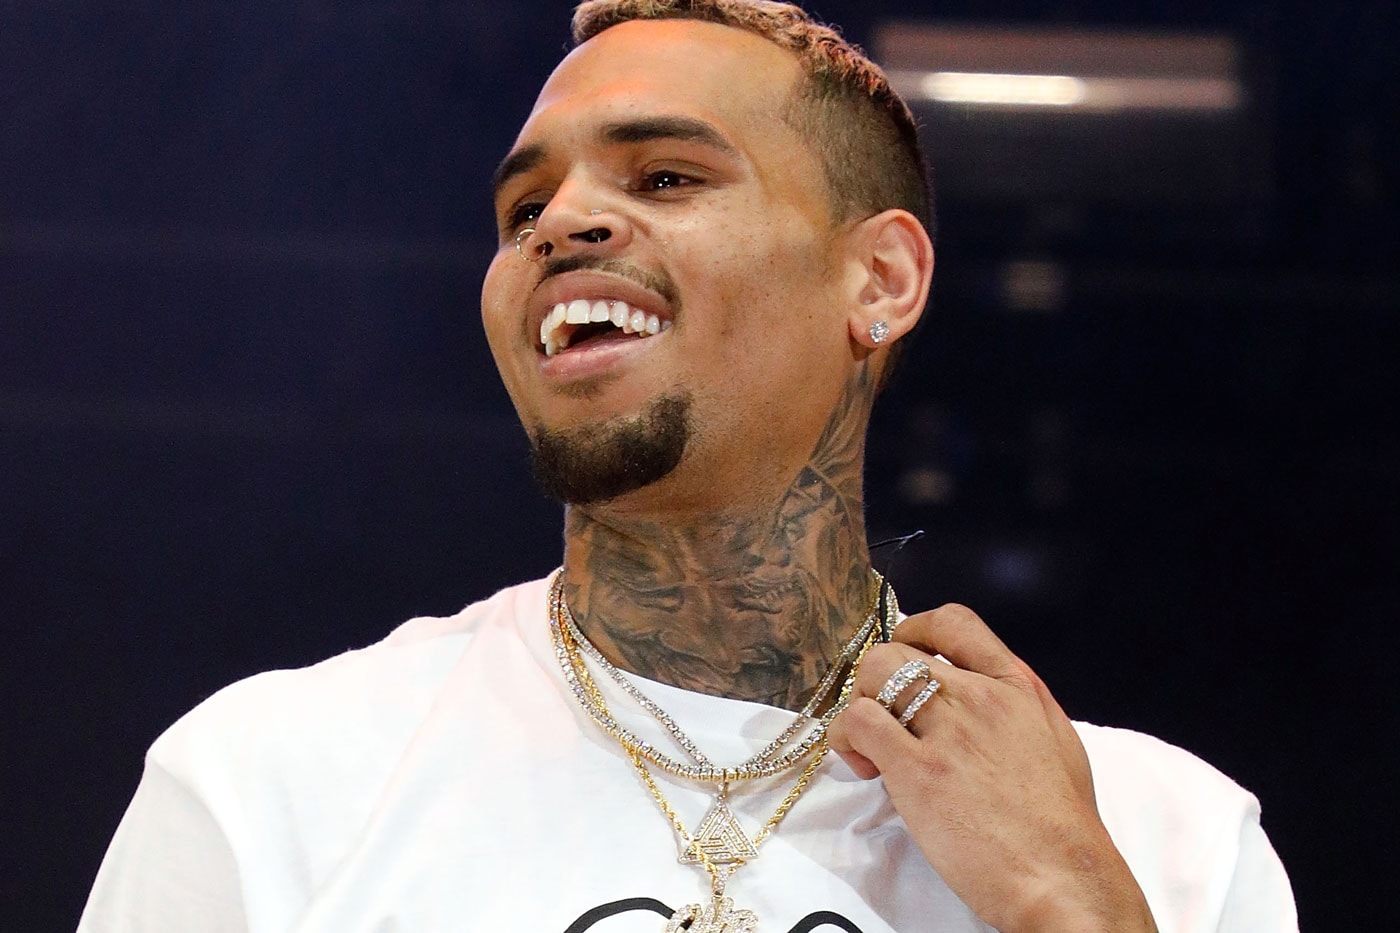 Chris Brown Shares Suggestive Video For "Back to Sleep"